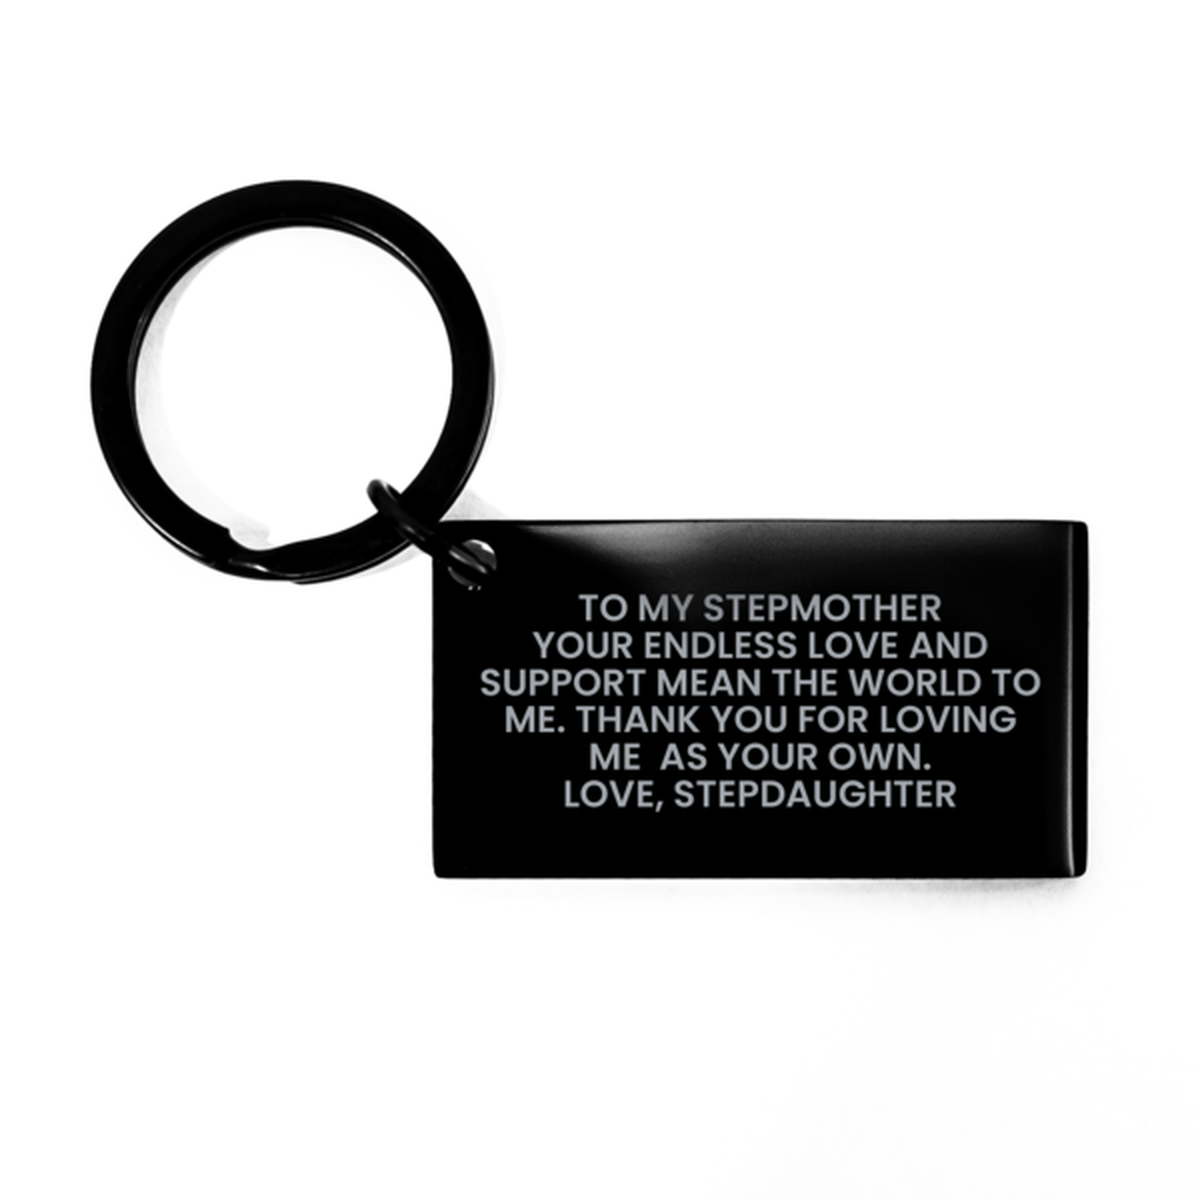 To My Stepmother Black Keychain, Your Endless Love, Mothers Day Gifts For Stepmother From Stepdaughter, Birthday Gifts For Women